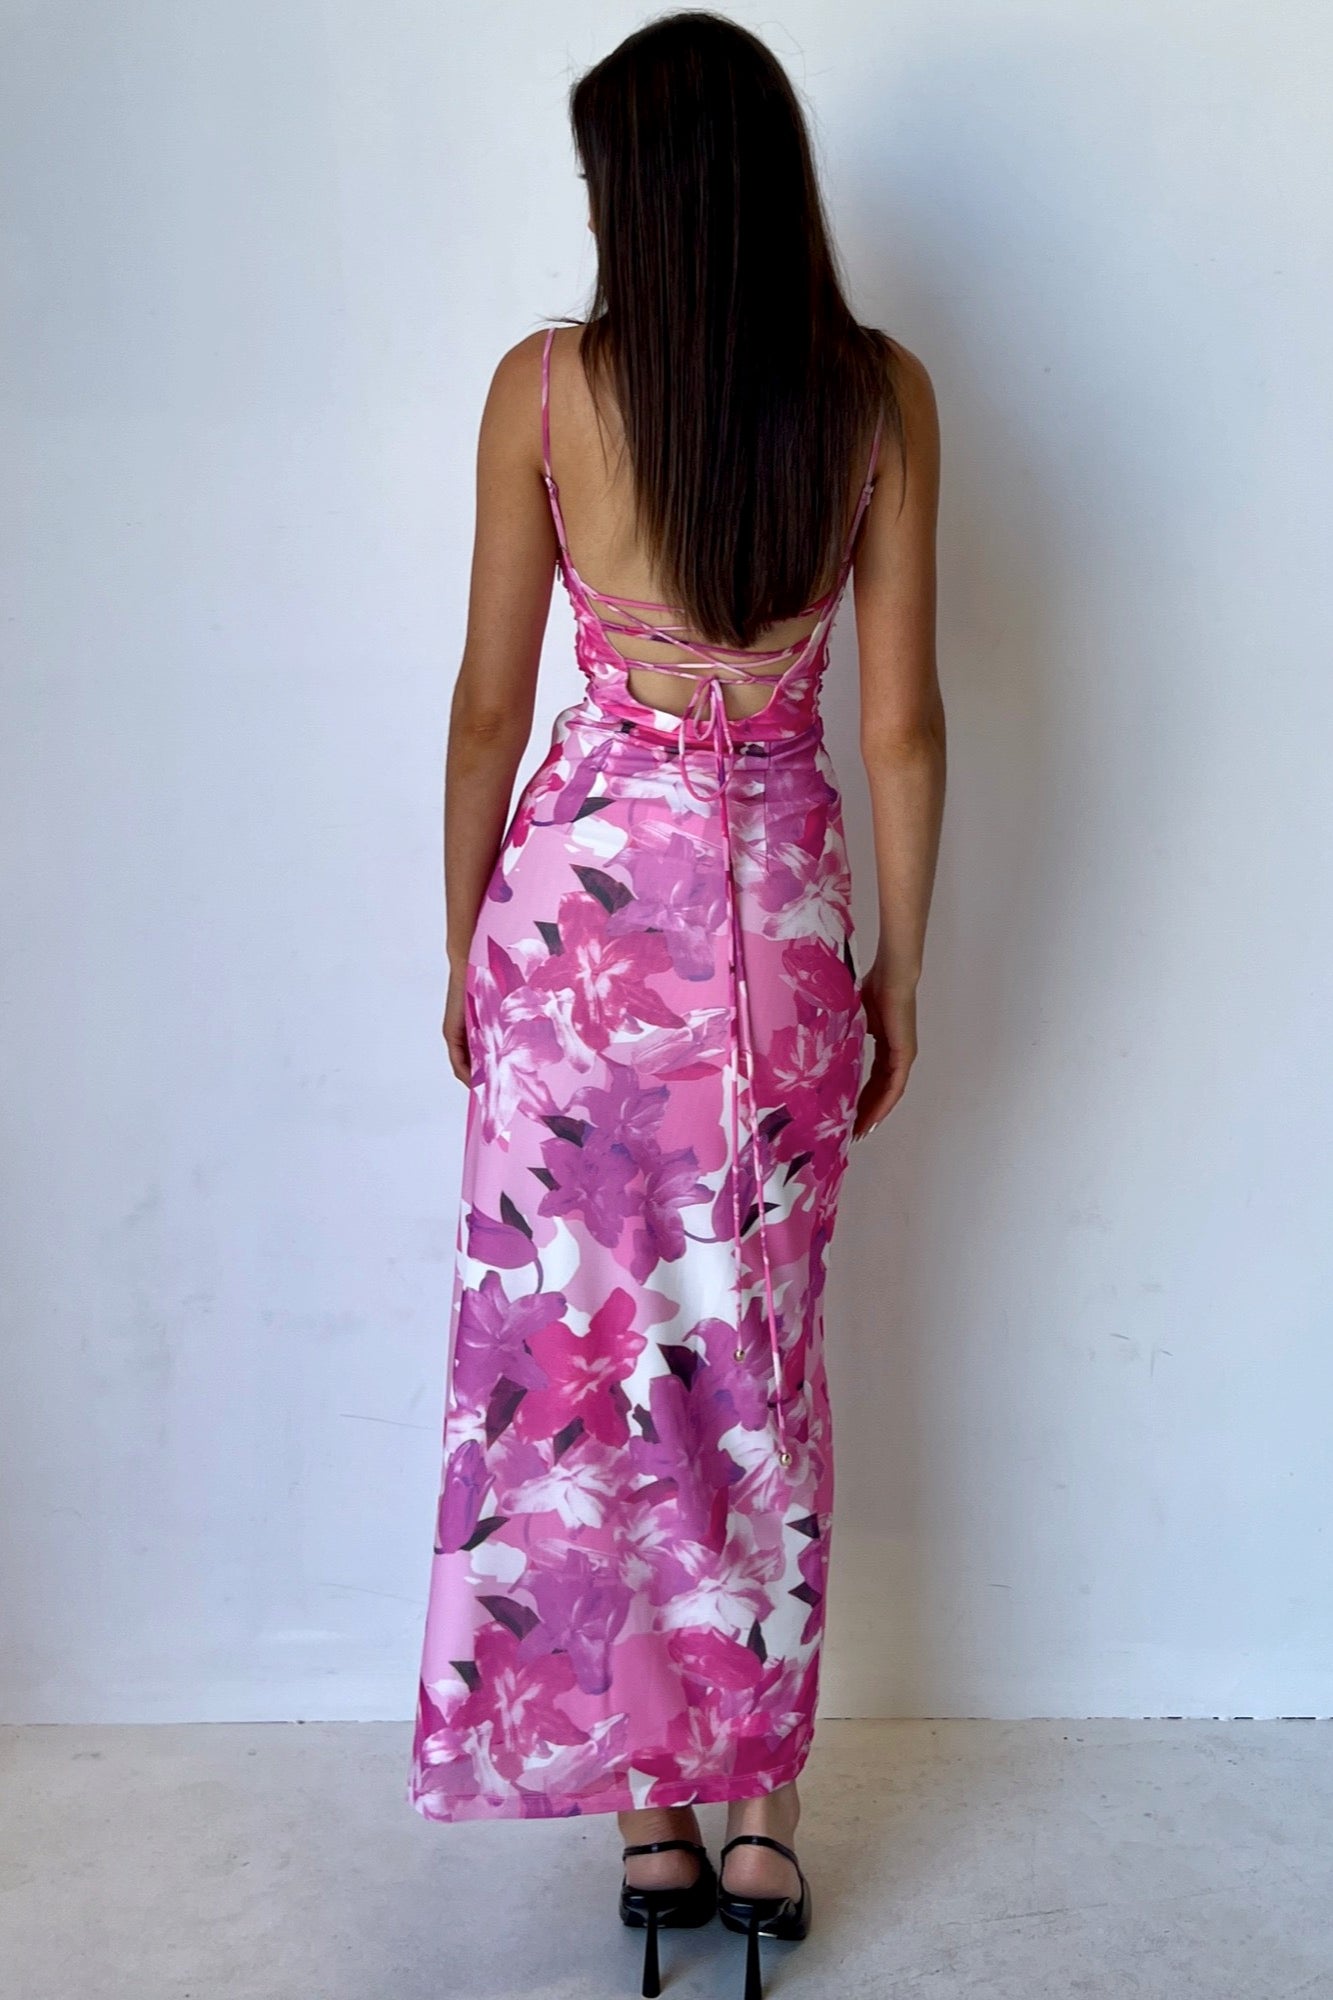 Distraction Dress - Pink Floral